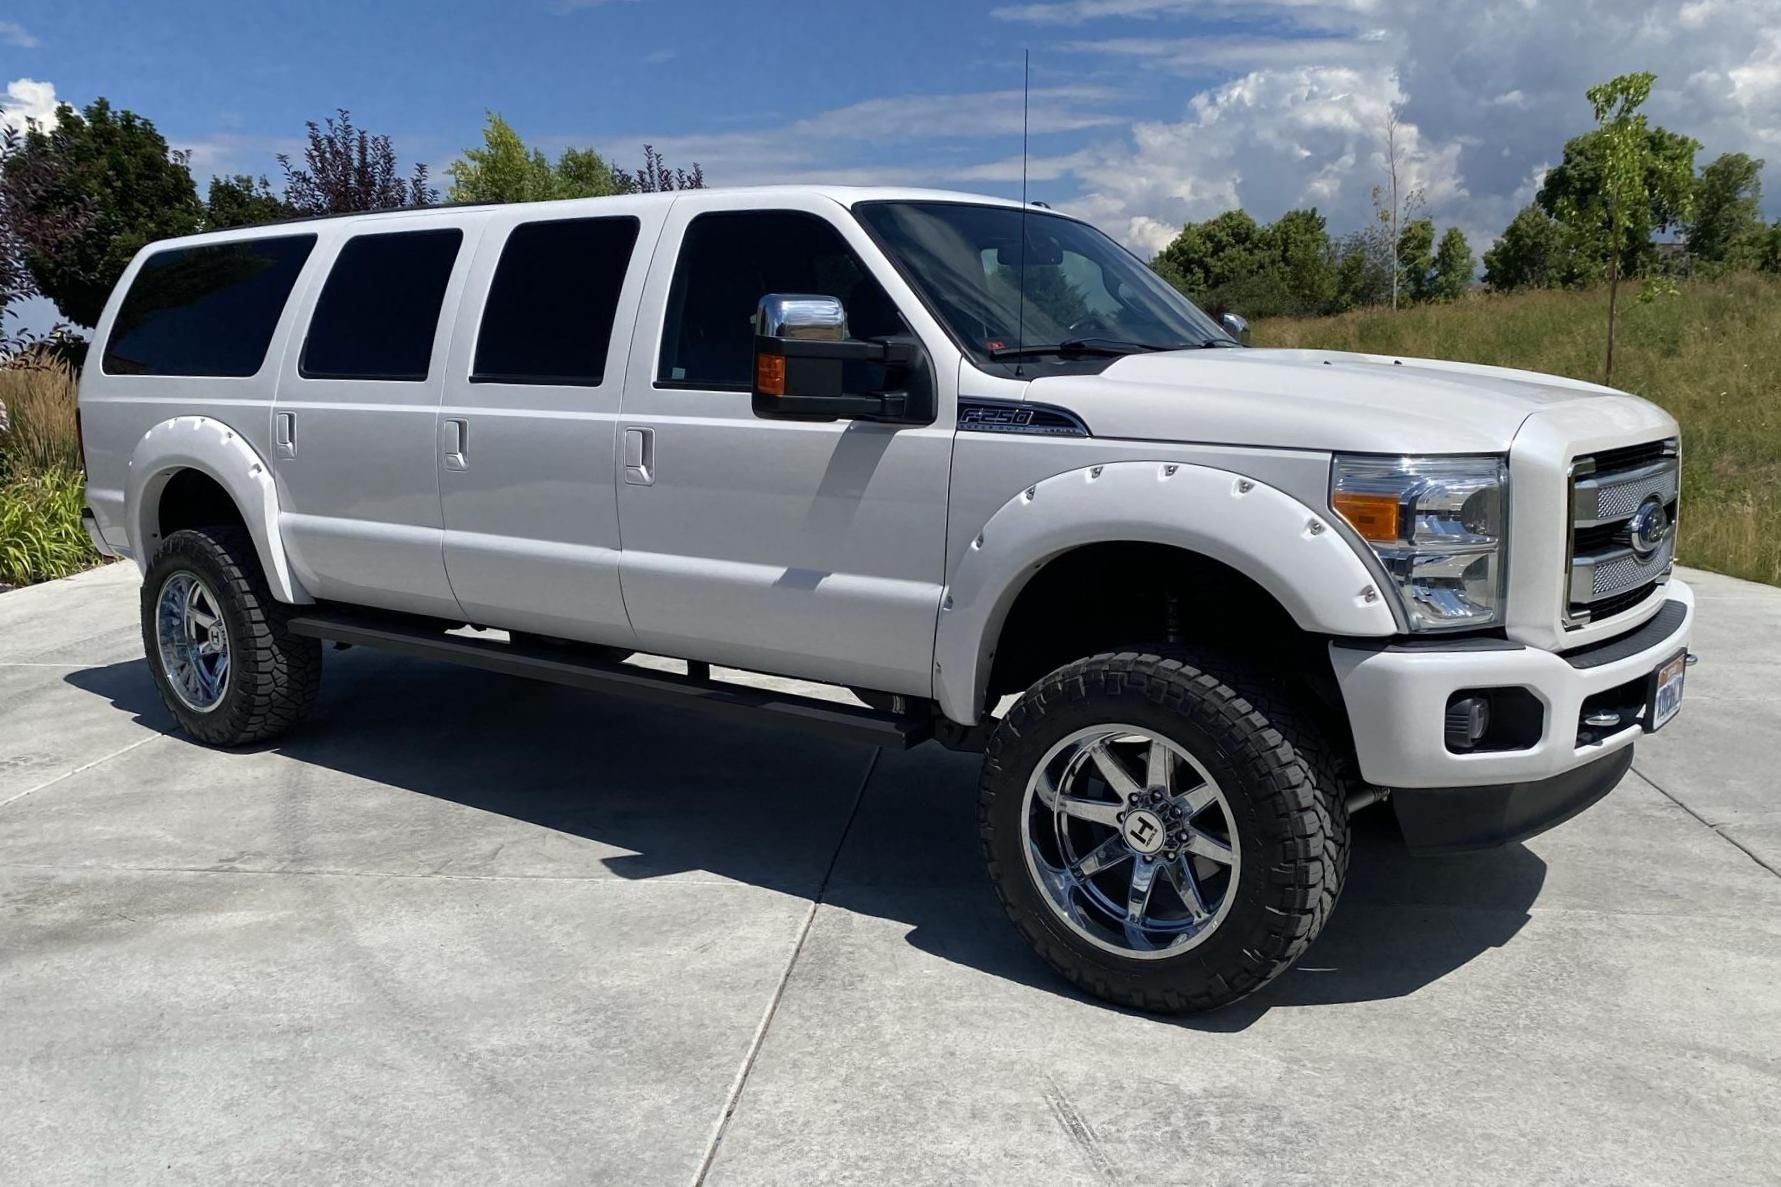 Six Door Ford F 250 Super Duty Suv Conversion Is Like A Modern Ford